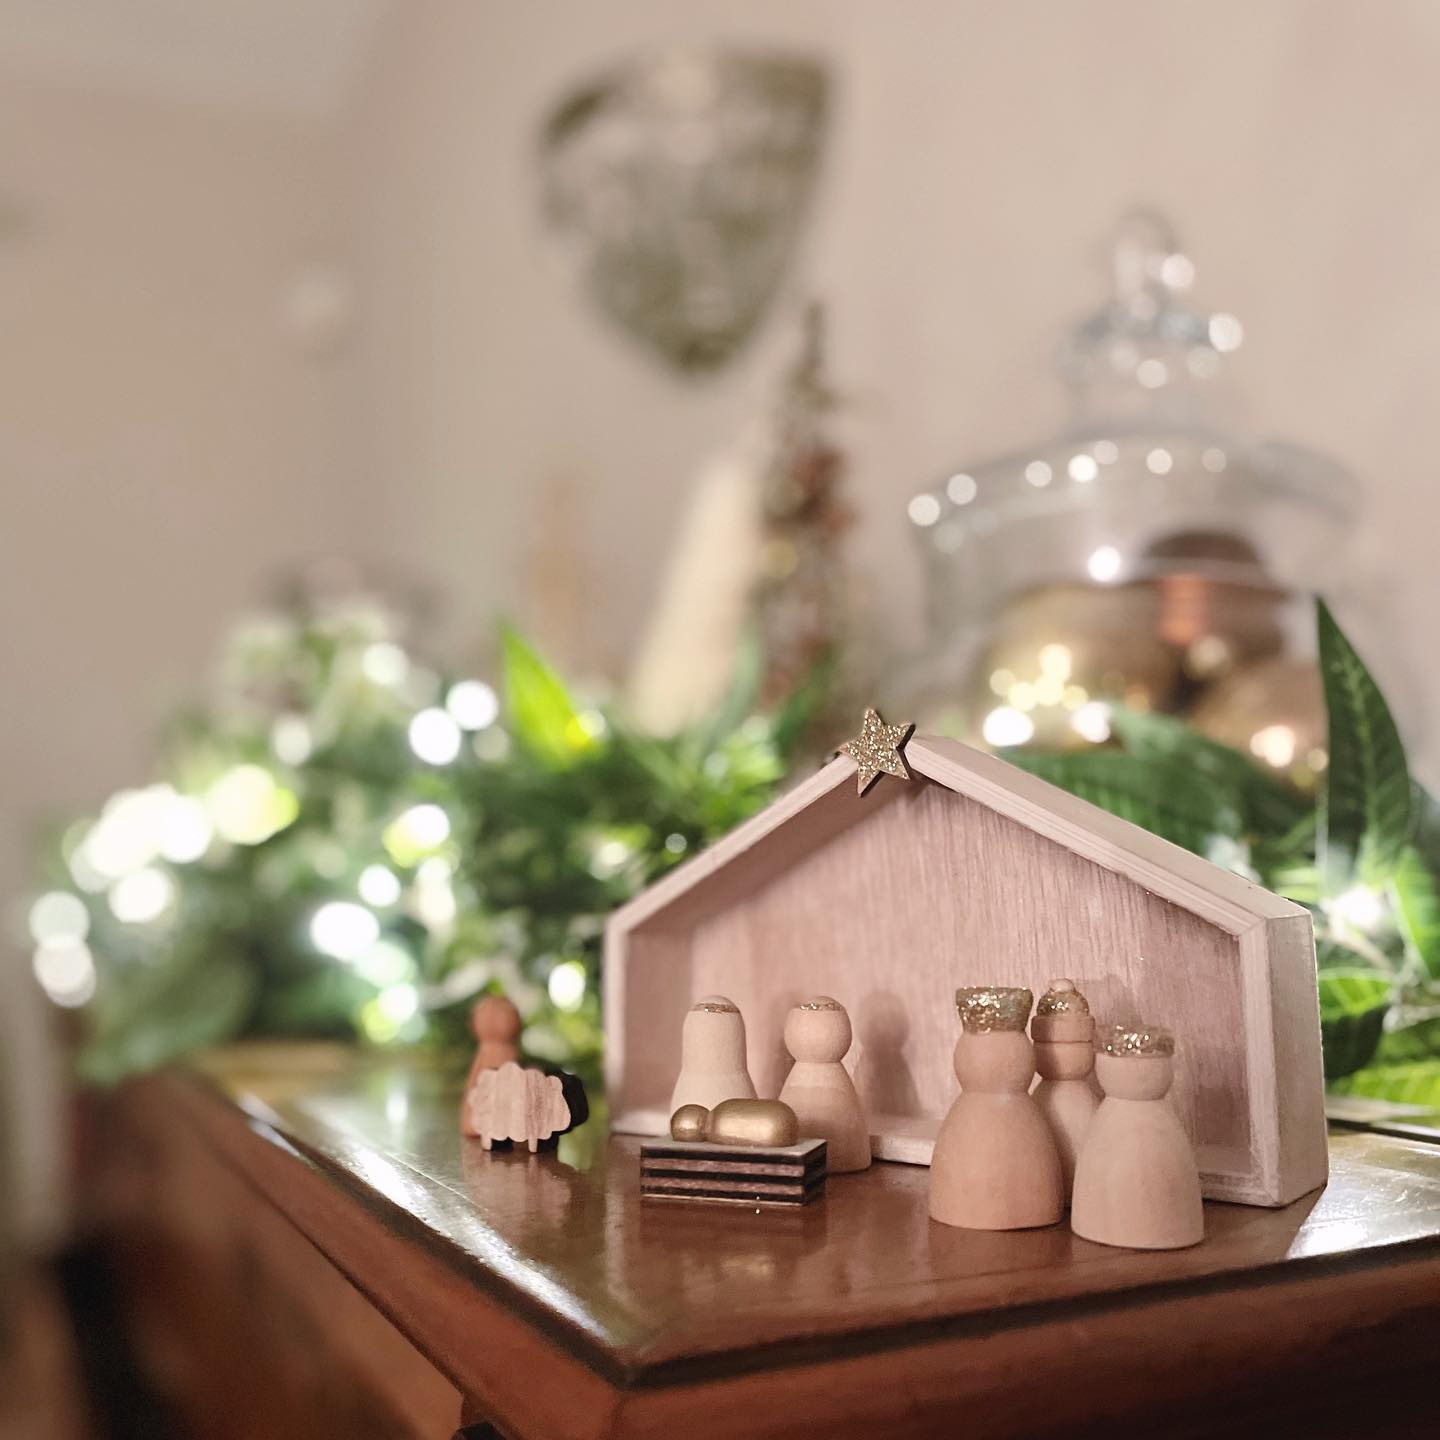 9th of December…. a simple nativity and a garland on the top of our piano (and warm white fairy lights of course!) You can see more of the piano on my stories (it dates back to 1899!)